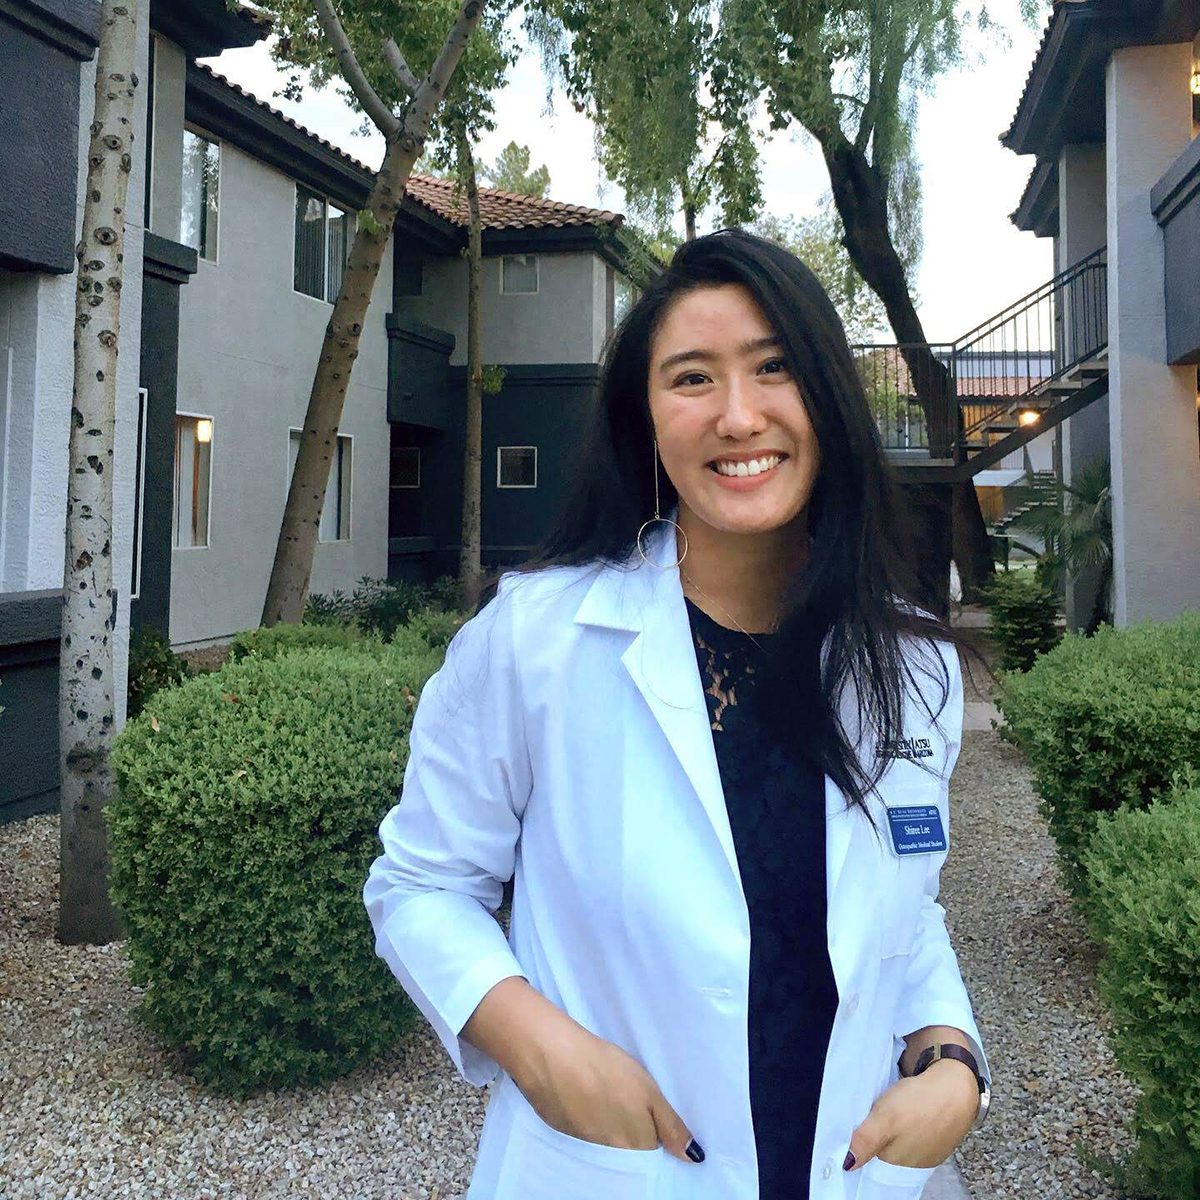 Shiree Lee, OMS III at A.T. Still University’s School of Osteopathic Medicine in Arizona